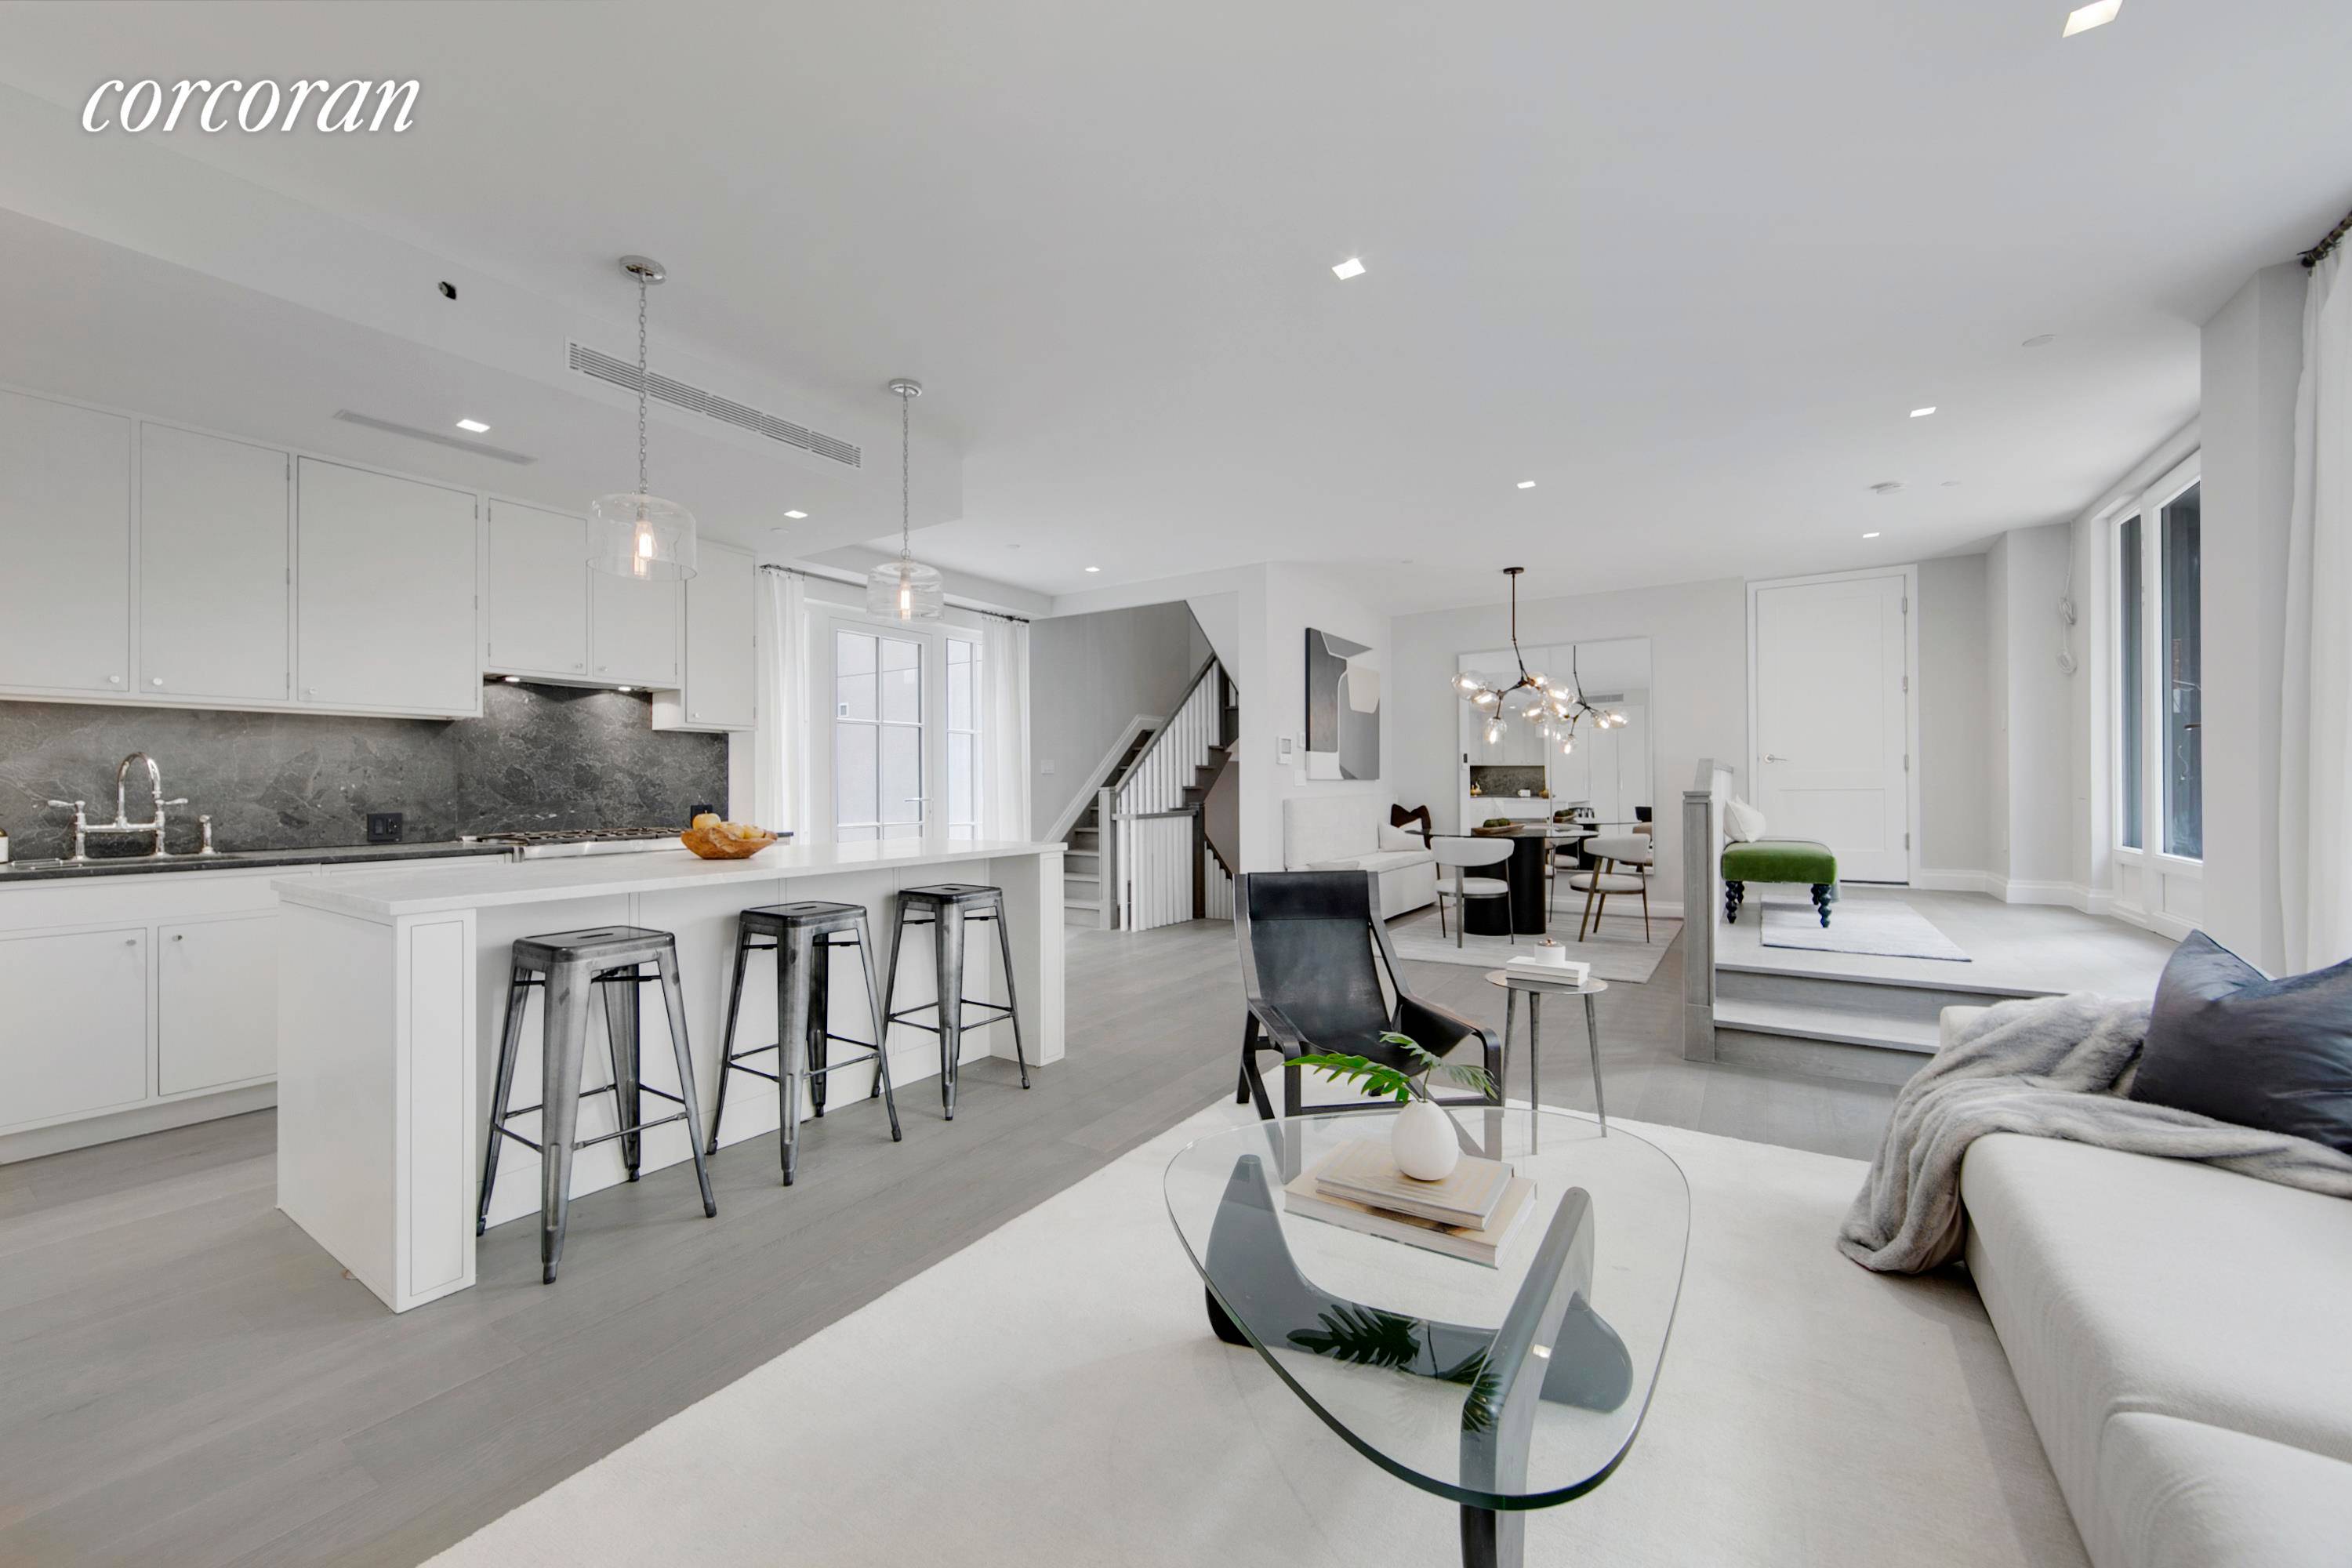 Furnished option available for 15, 500 About Building Welcome to 77 Orange Street, a boutique new development located in the heart of Brooklyn Height's Historic District designed by the world ...